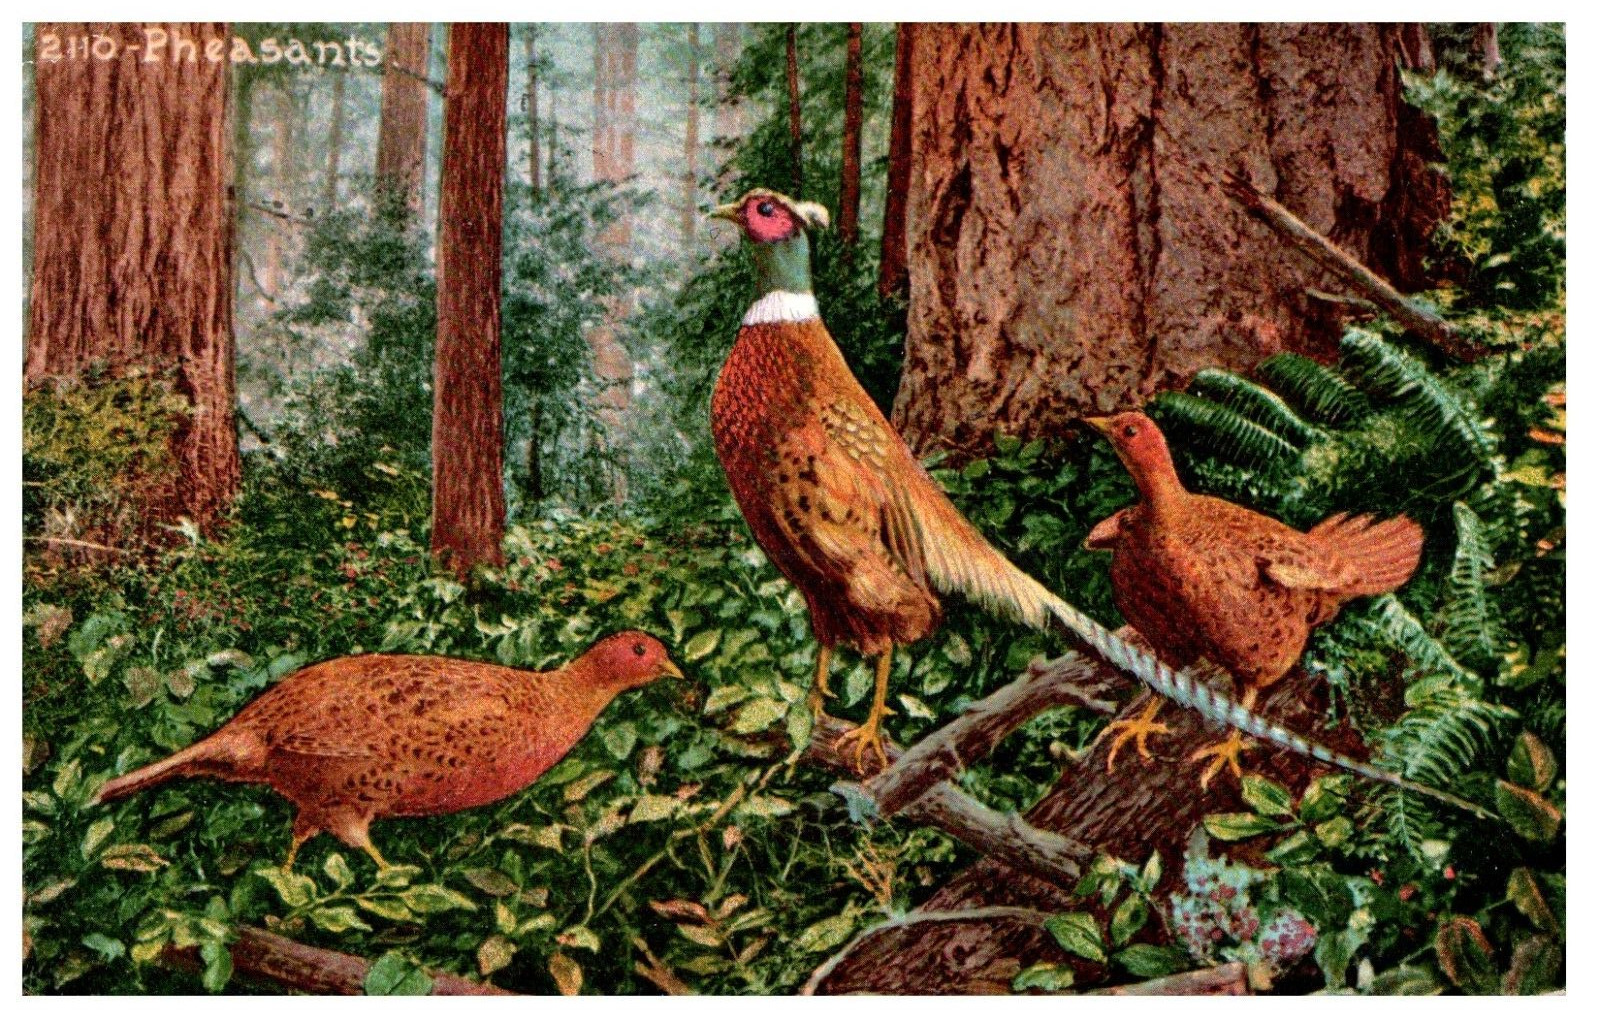 2110 Pheasants in the Forrest CA Mitchell Corvalis Cancel Postcard 1913